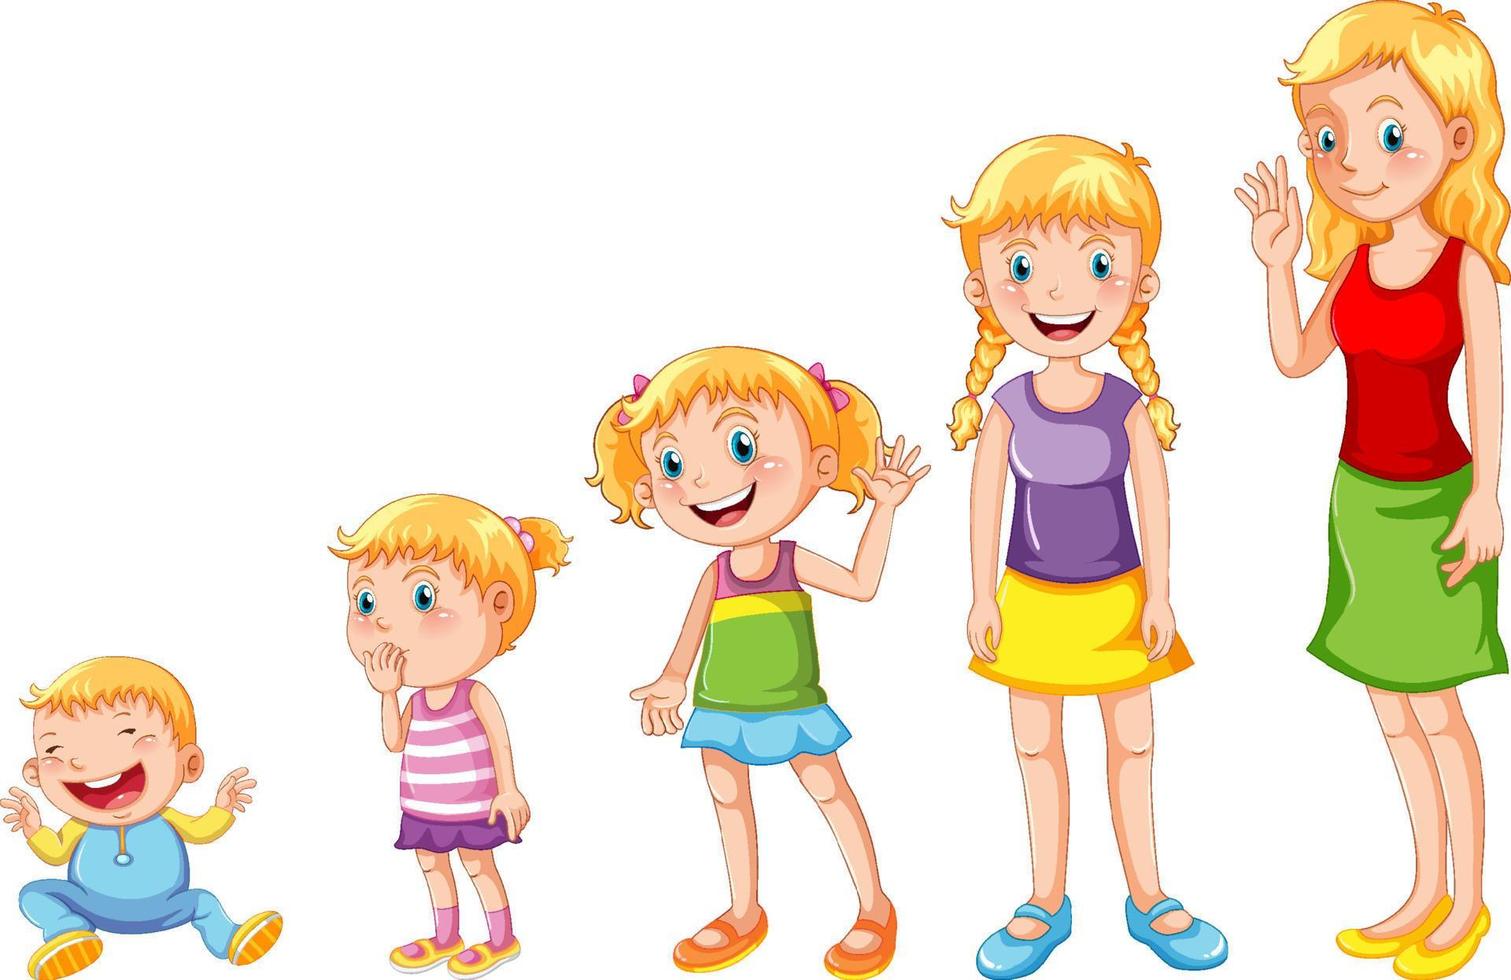 Children in different stages vector